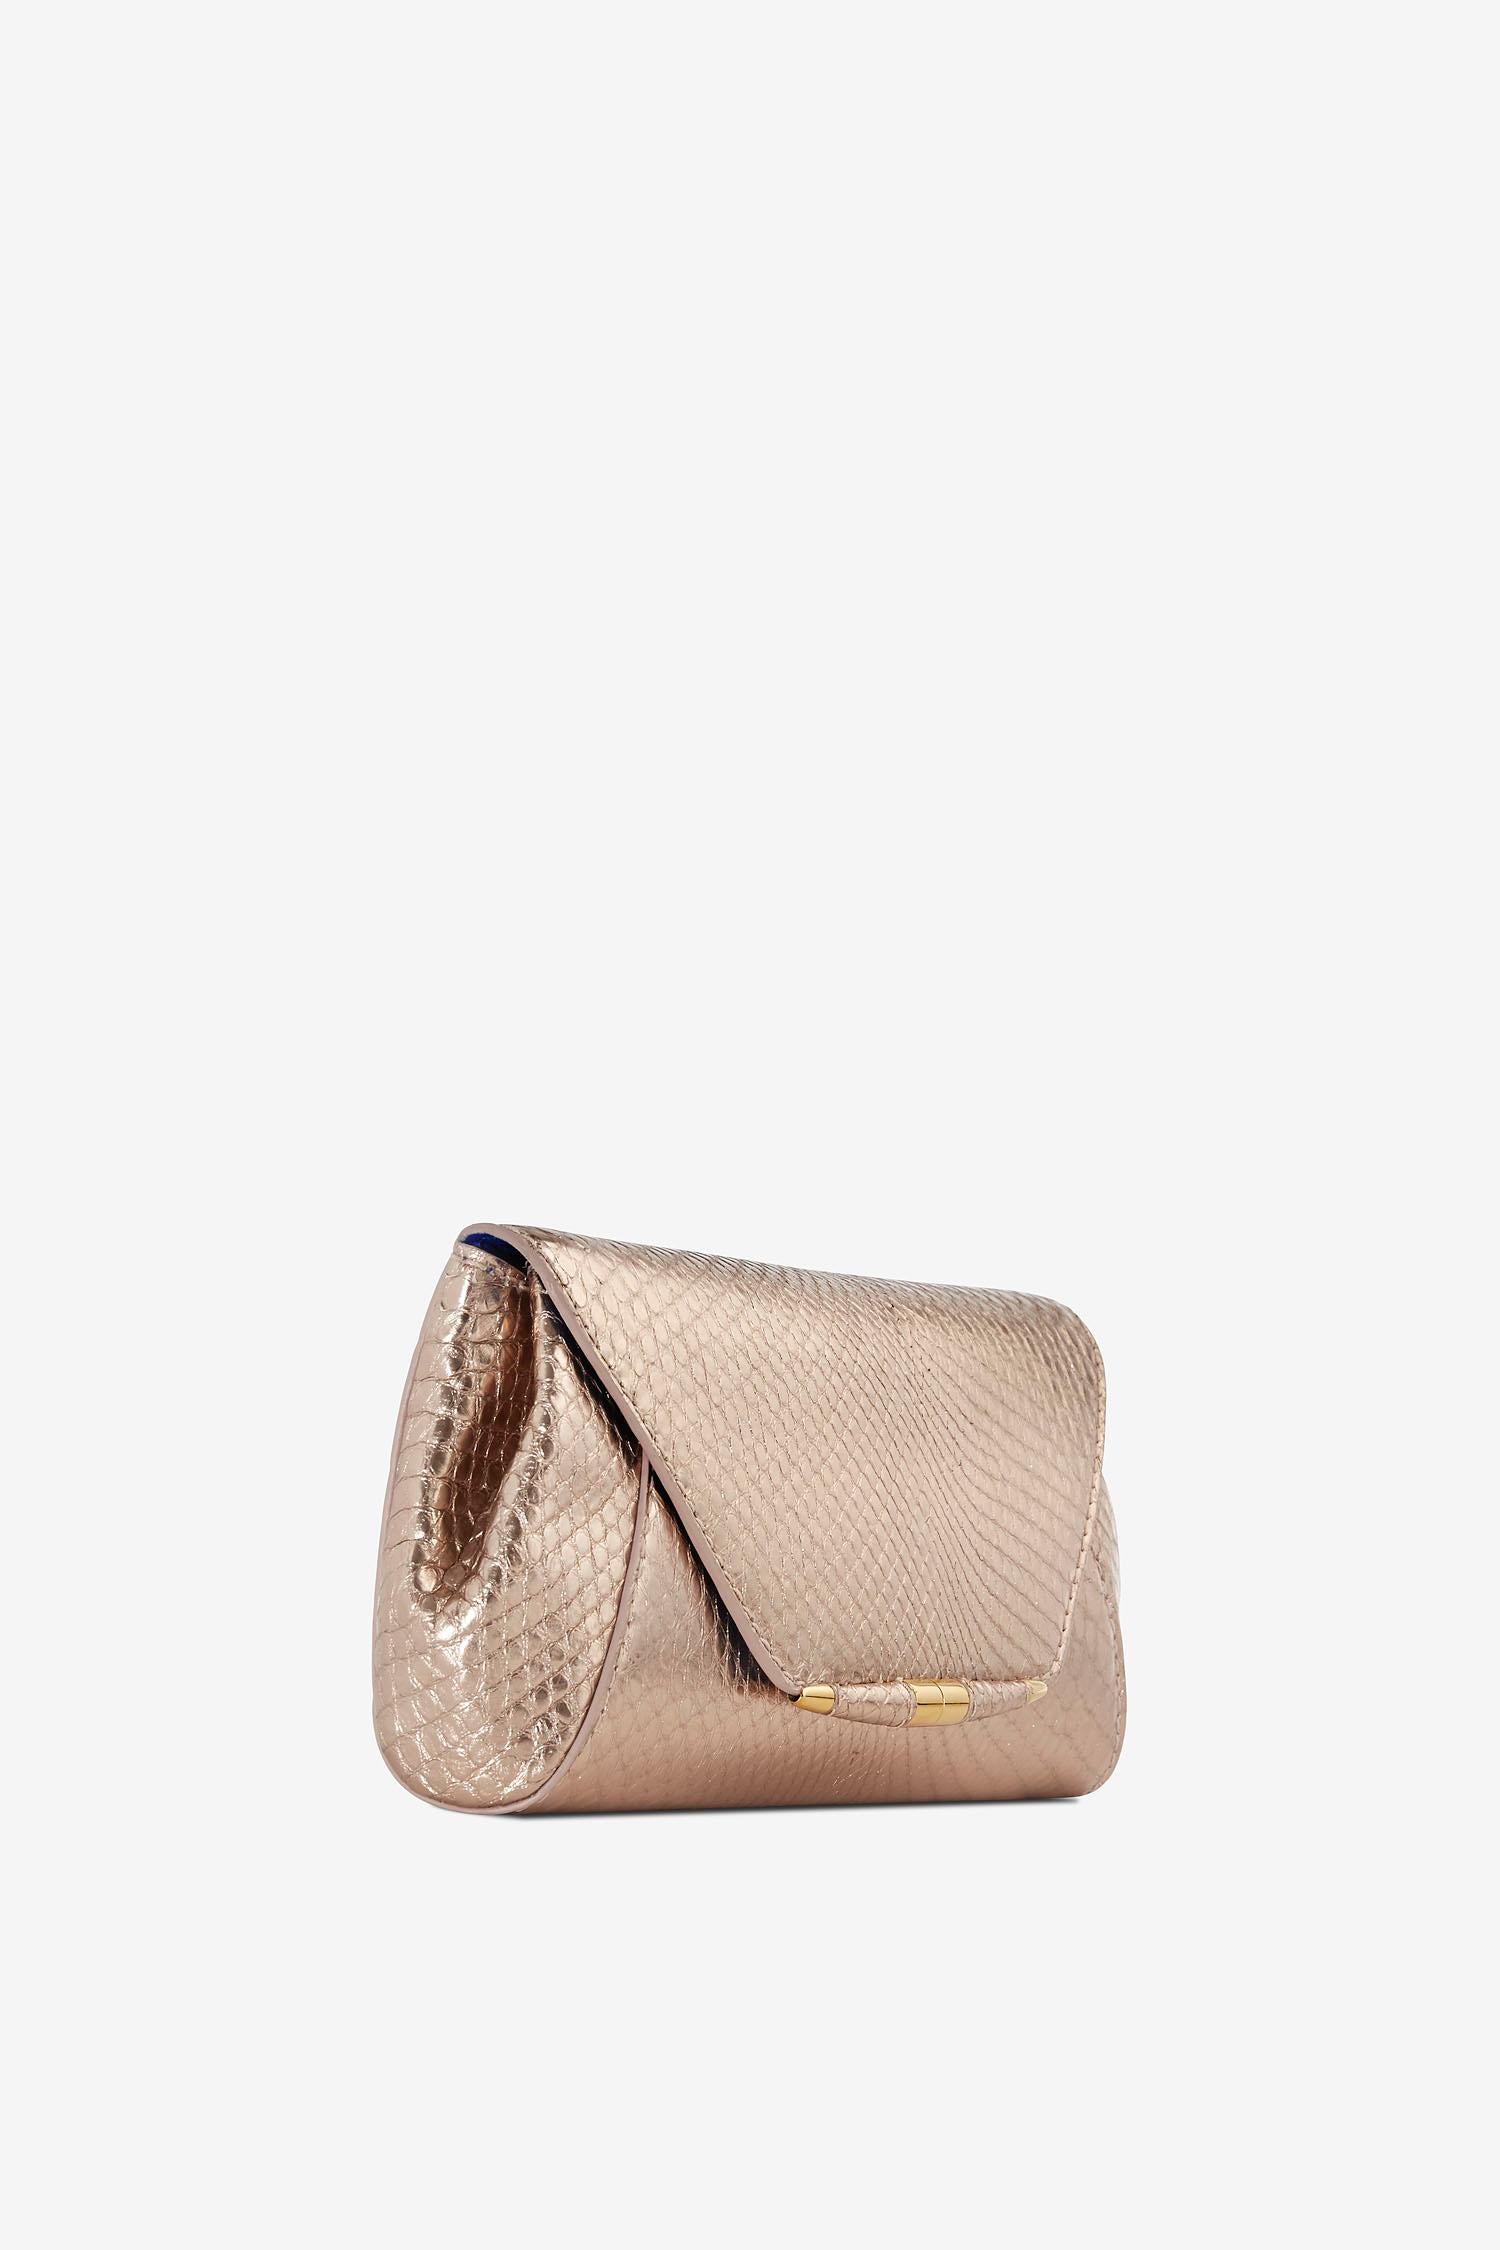 TYLER ELLIS Aimee Clutch Large Rose Gold Python Gold Hardware In New Condition In Los Angeles, CA